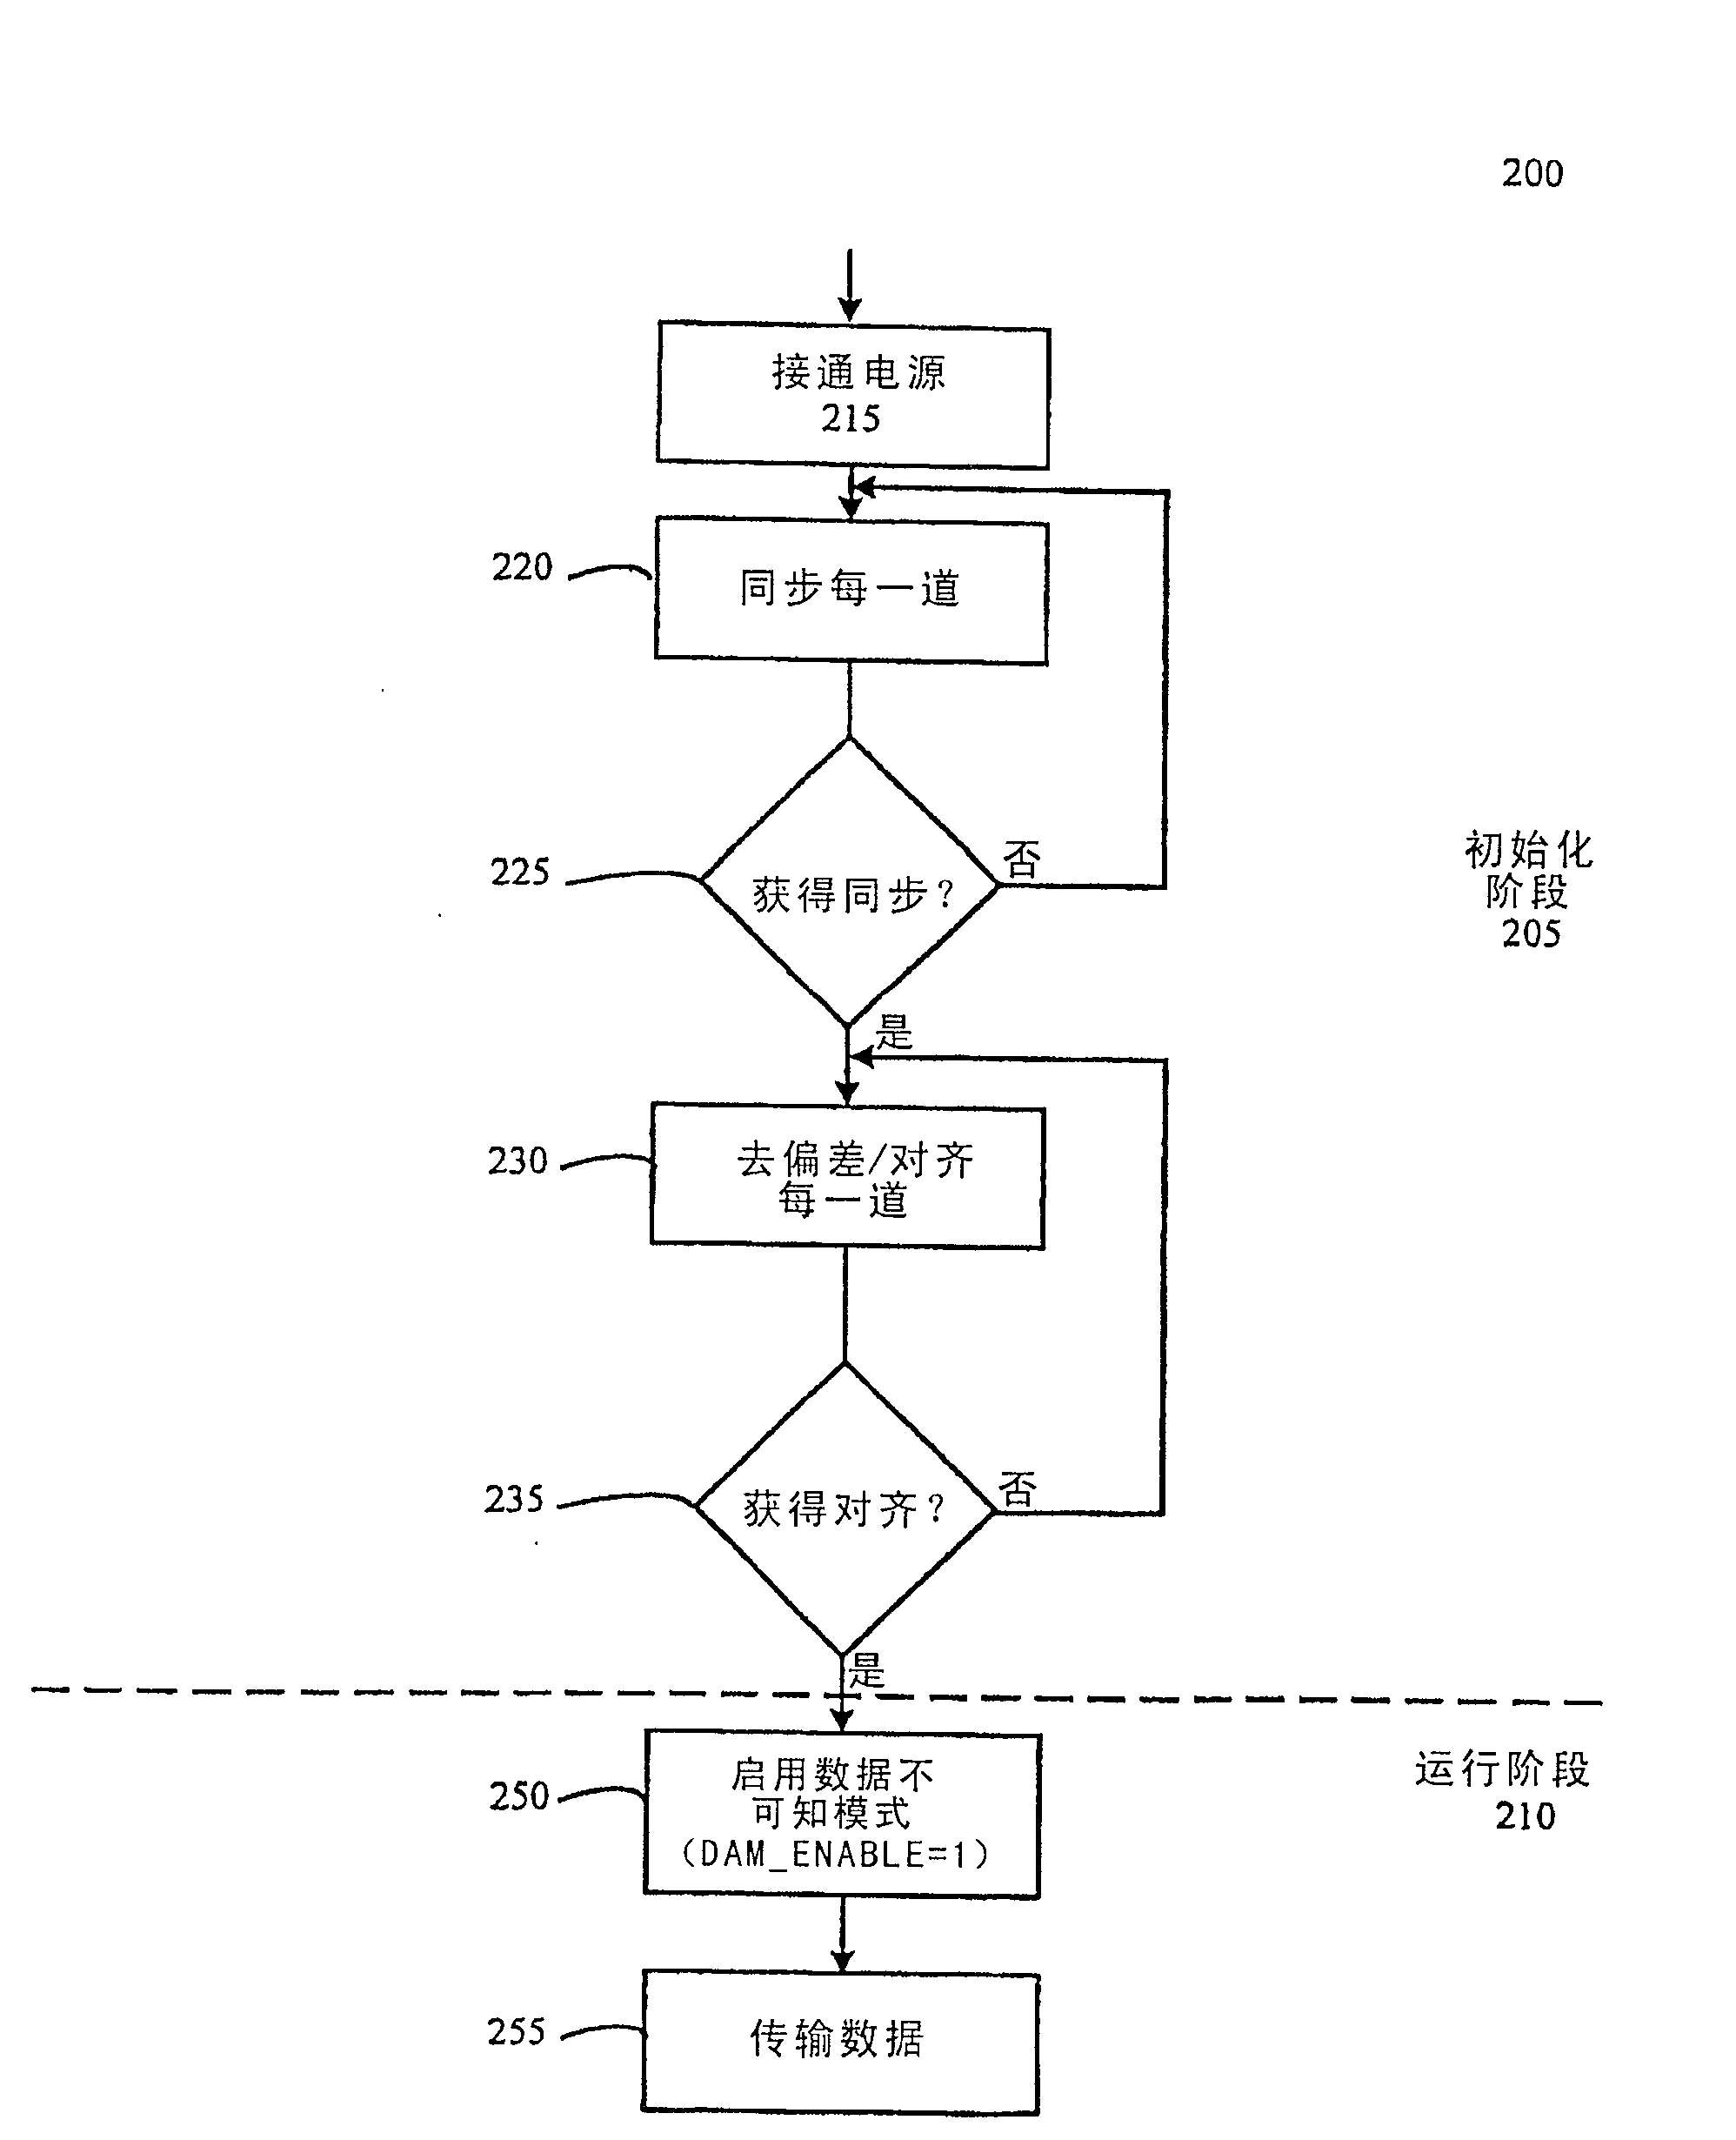 Protocol independent transmission using a 10 gigabit attachment unit interface